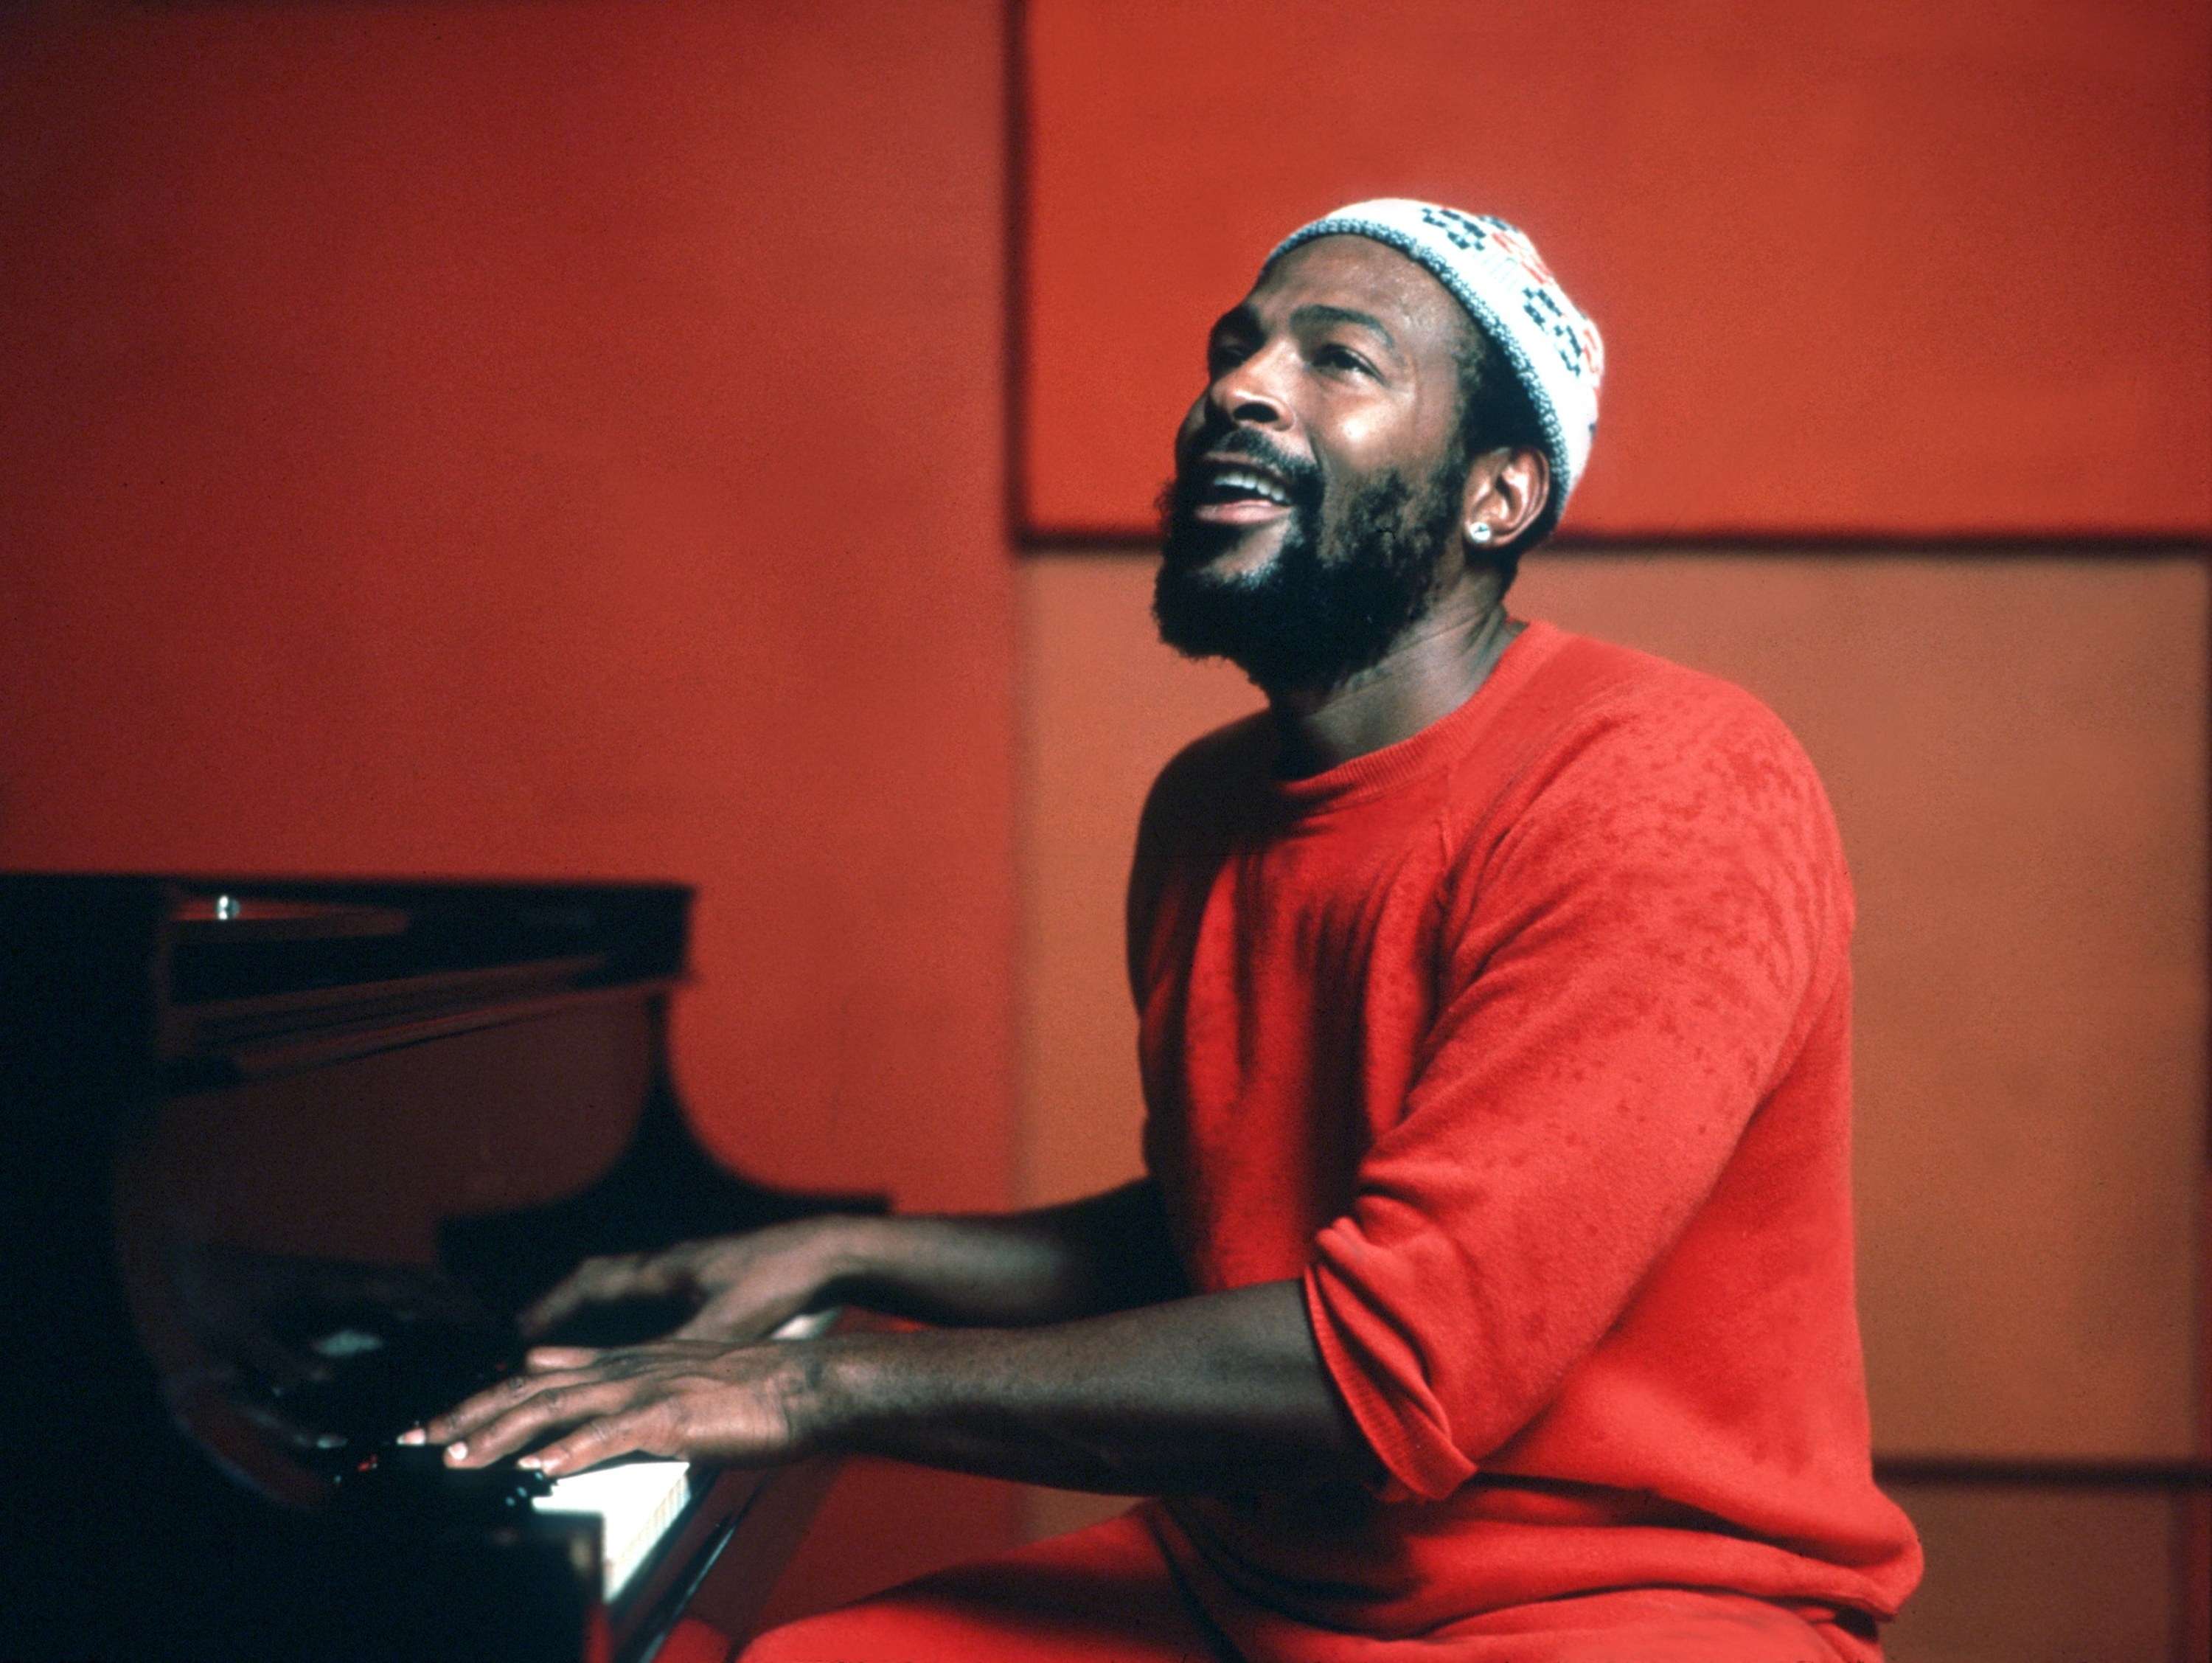 A classic photo Marvin Gaye playing the piano while wearing in orange sweater and in an orange room in 1974